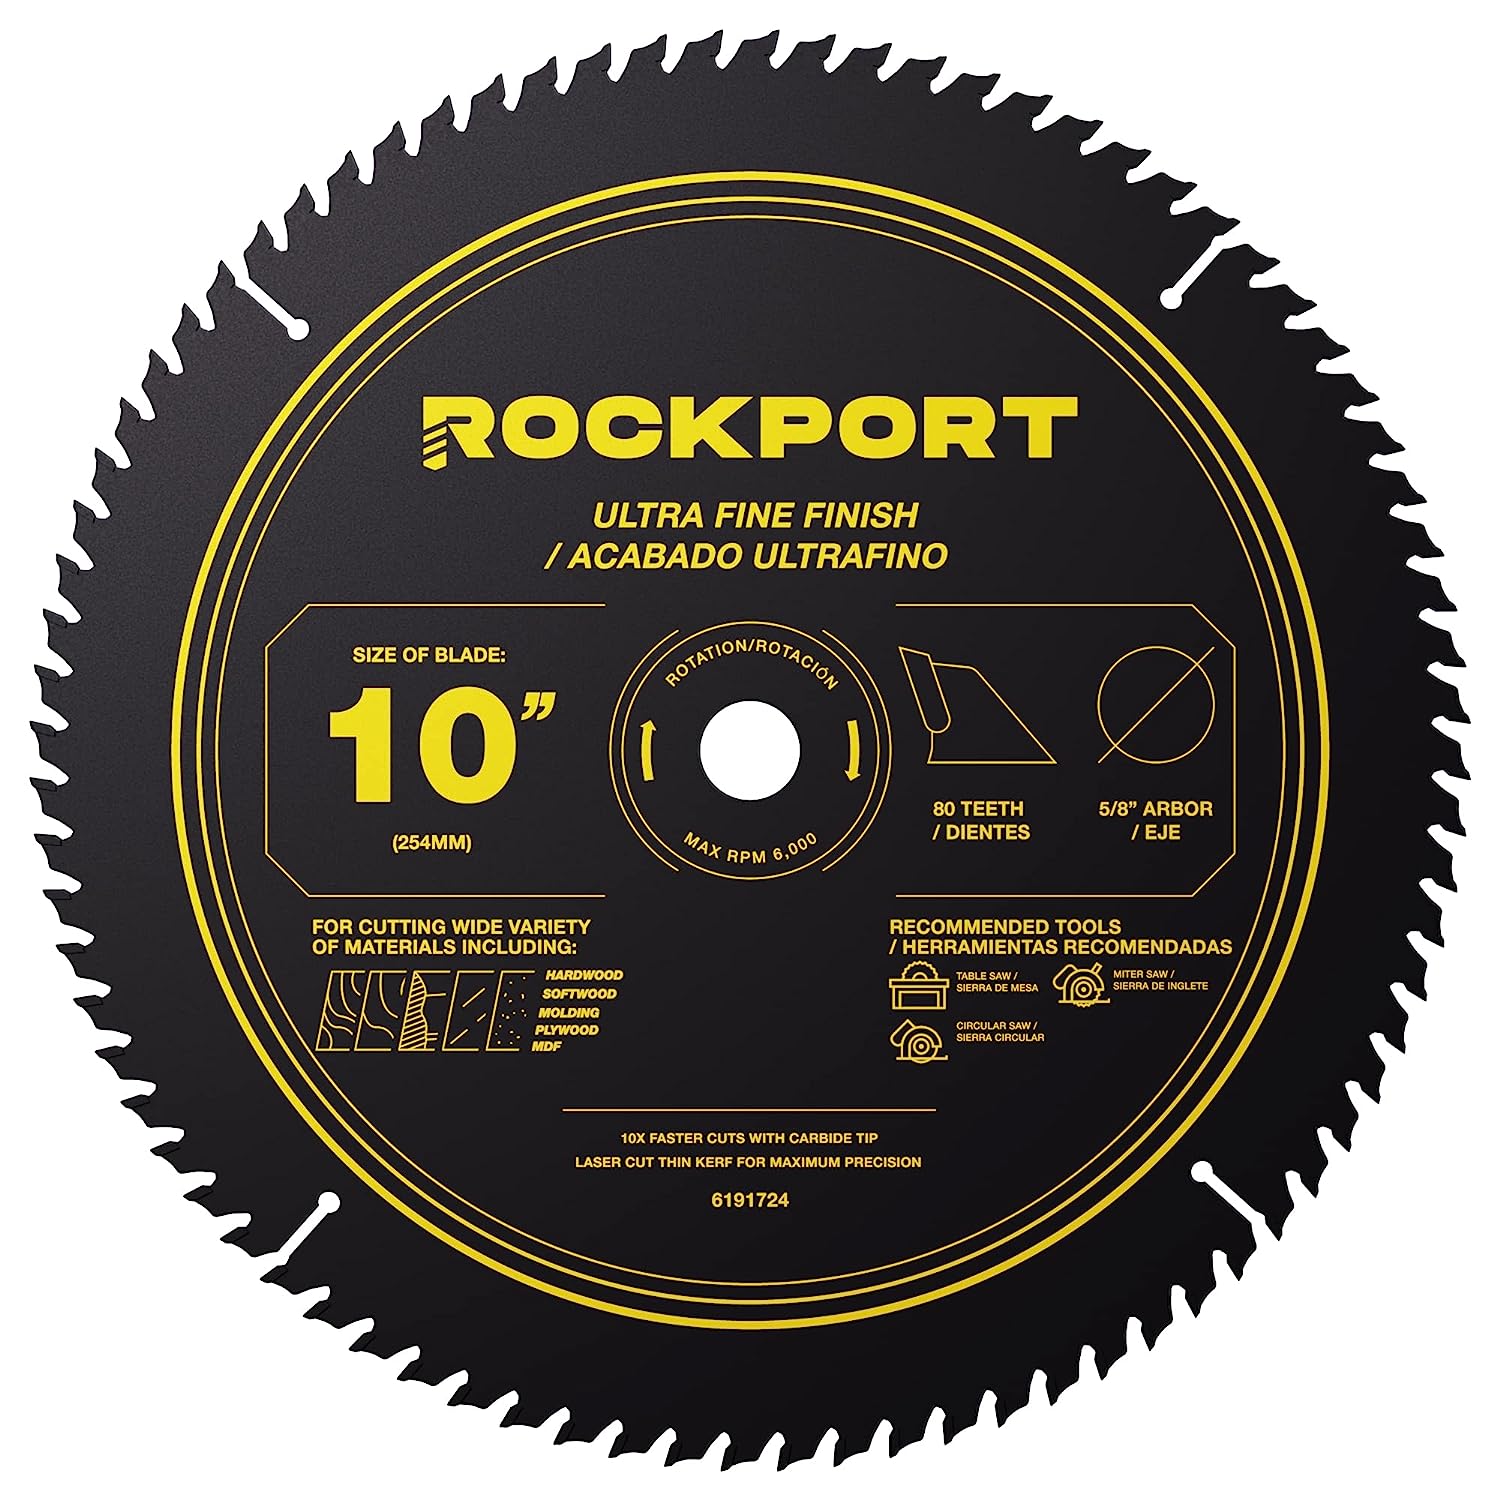 ROCKPORT Table Saw Blades 10 inch 80 Teeth - (1 Pack) [...]